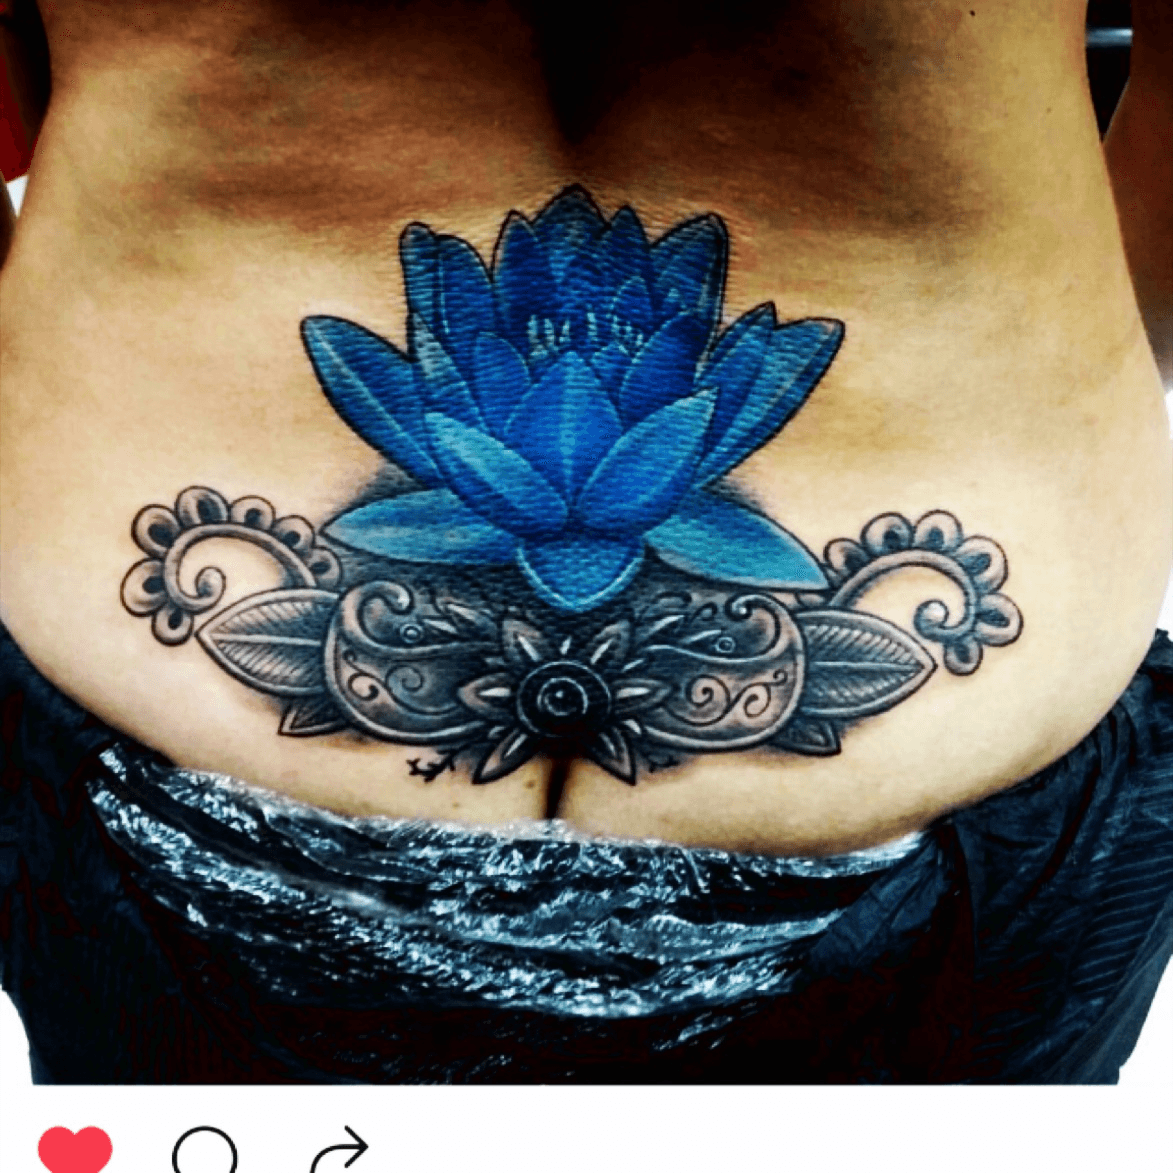 Cambodiaink Tattoo art studio  the Purple and blue lotus tattoo custom  design cambodia lotus tattoo we are available all kind of tattoo bamboo  poking or machineprovides original khmer Sakyant and the